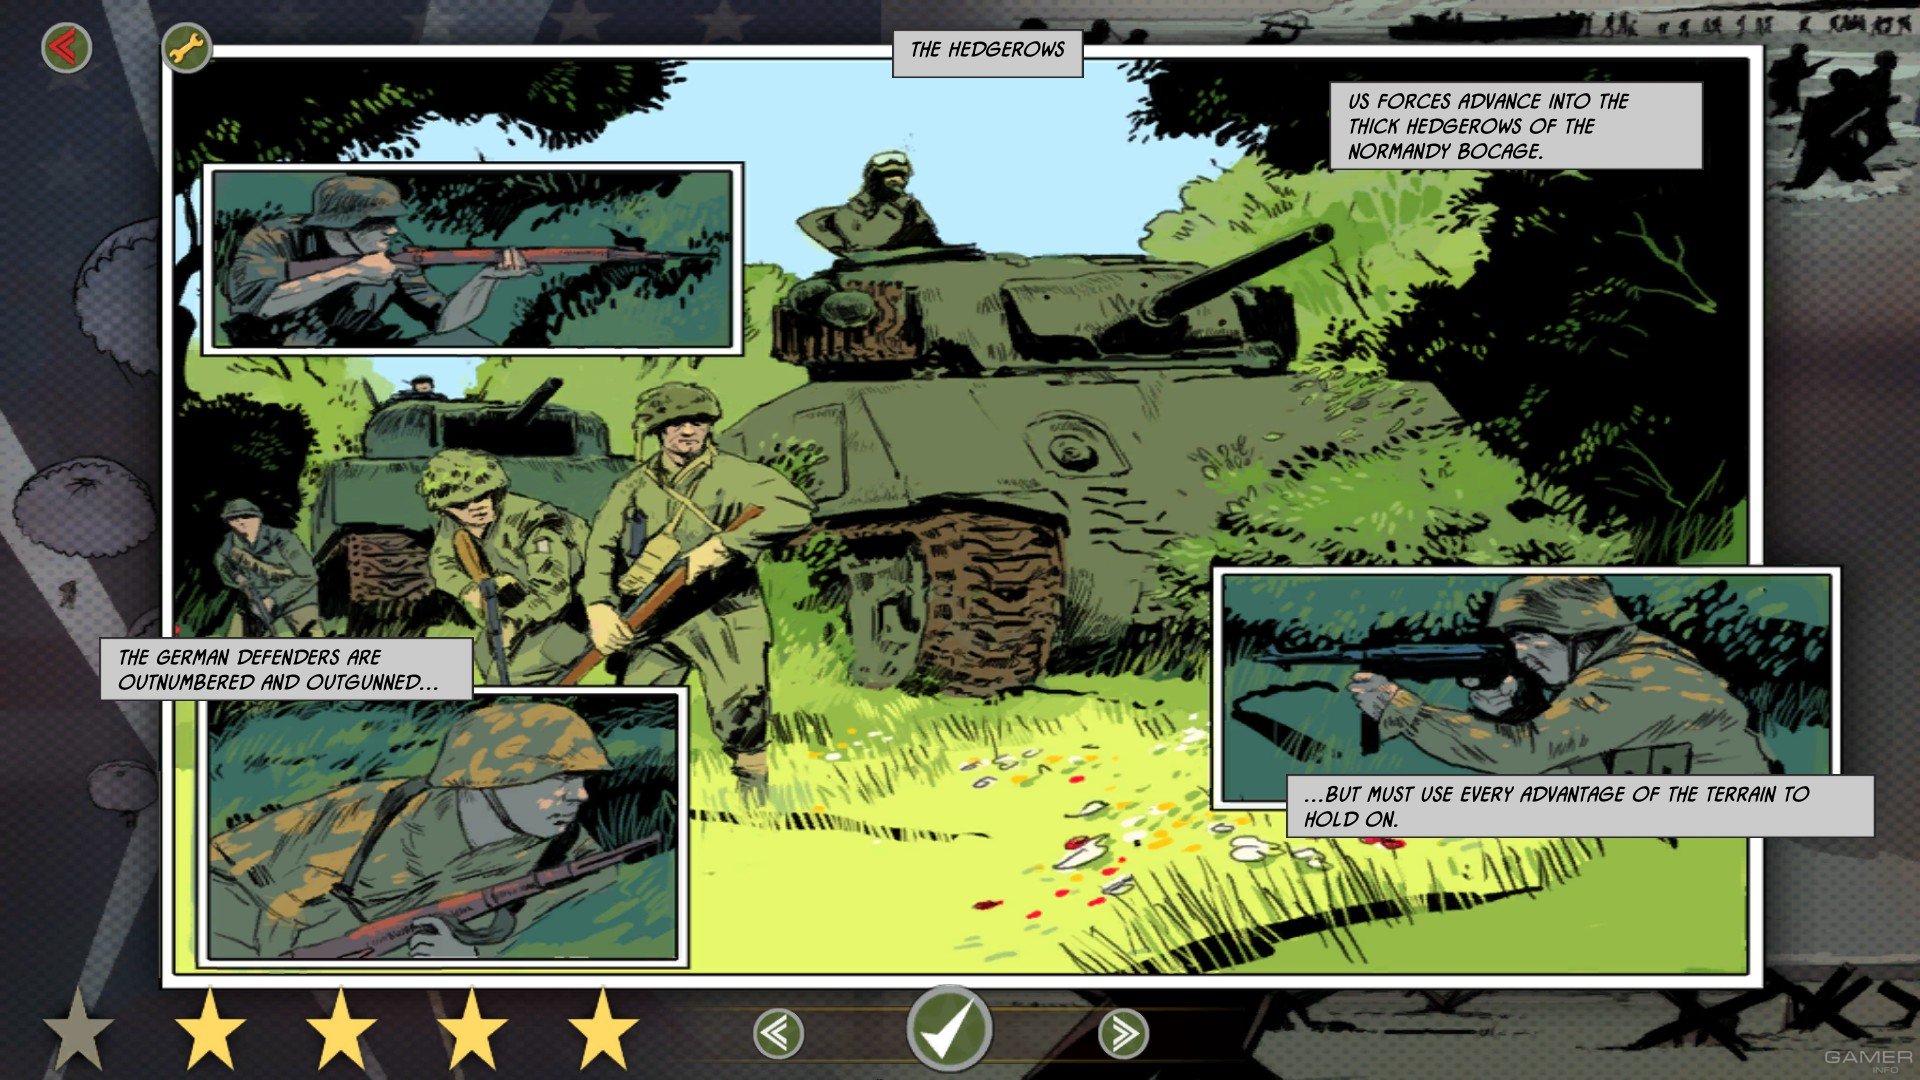 Battle Academy: Rommel in Normandy (2013 video game)